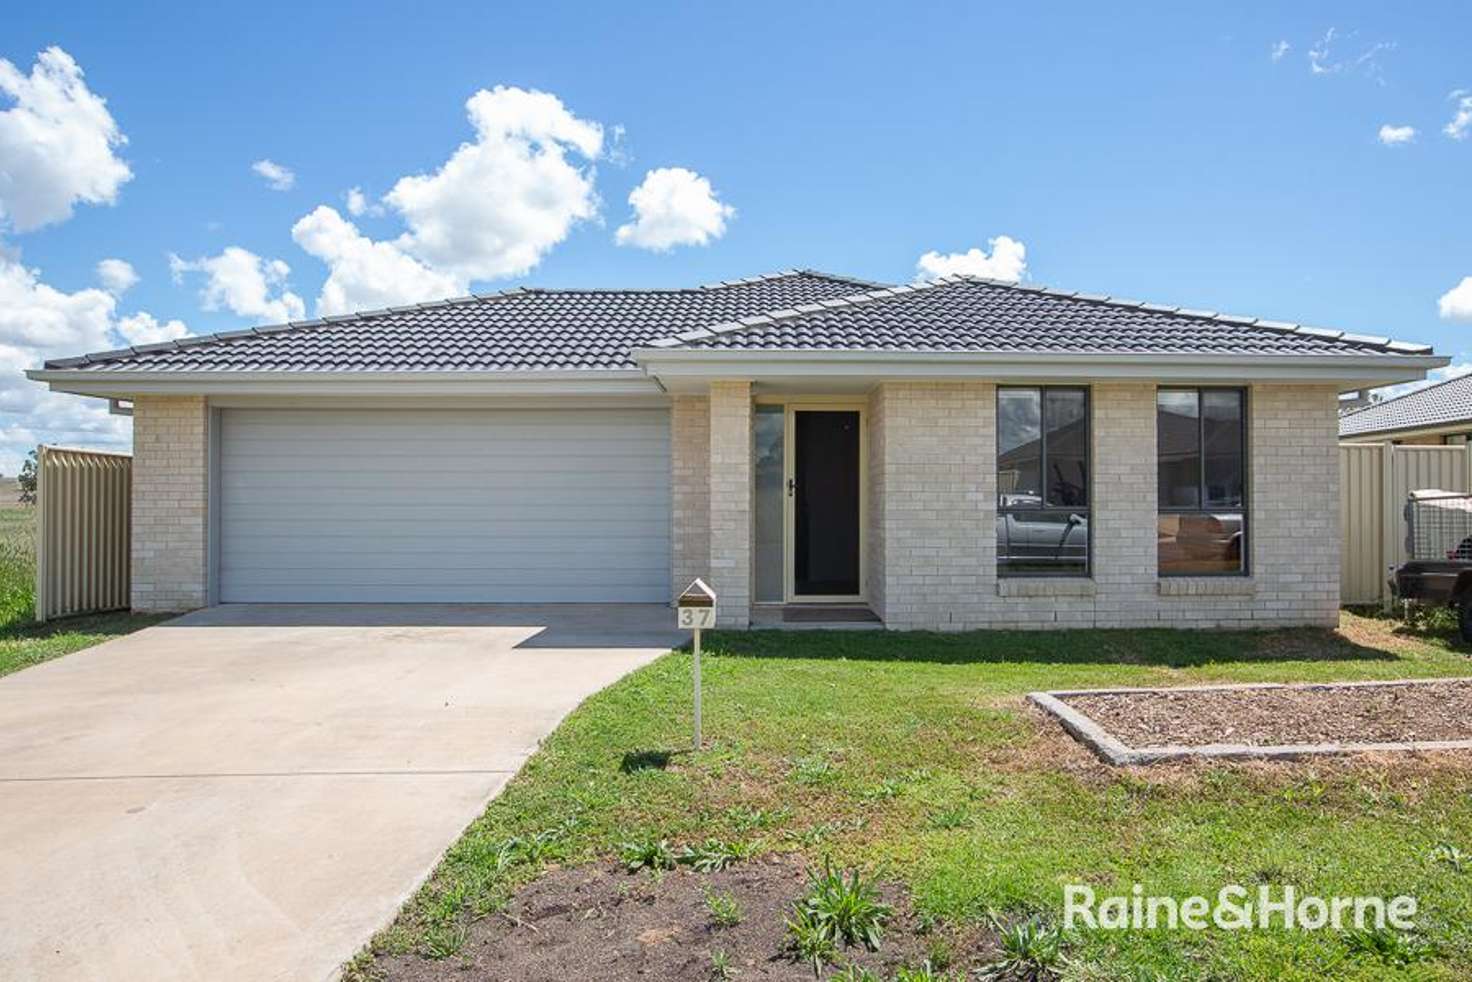 Main view of Homely house listing, 37 Flemming Crescent, Tamworth NSW 2340